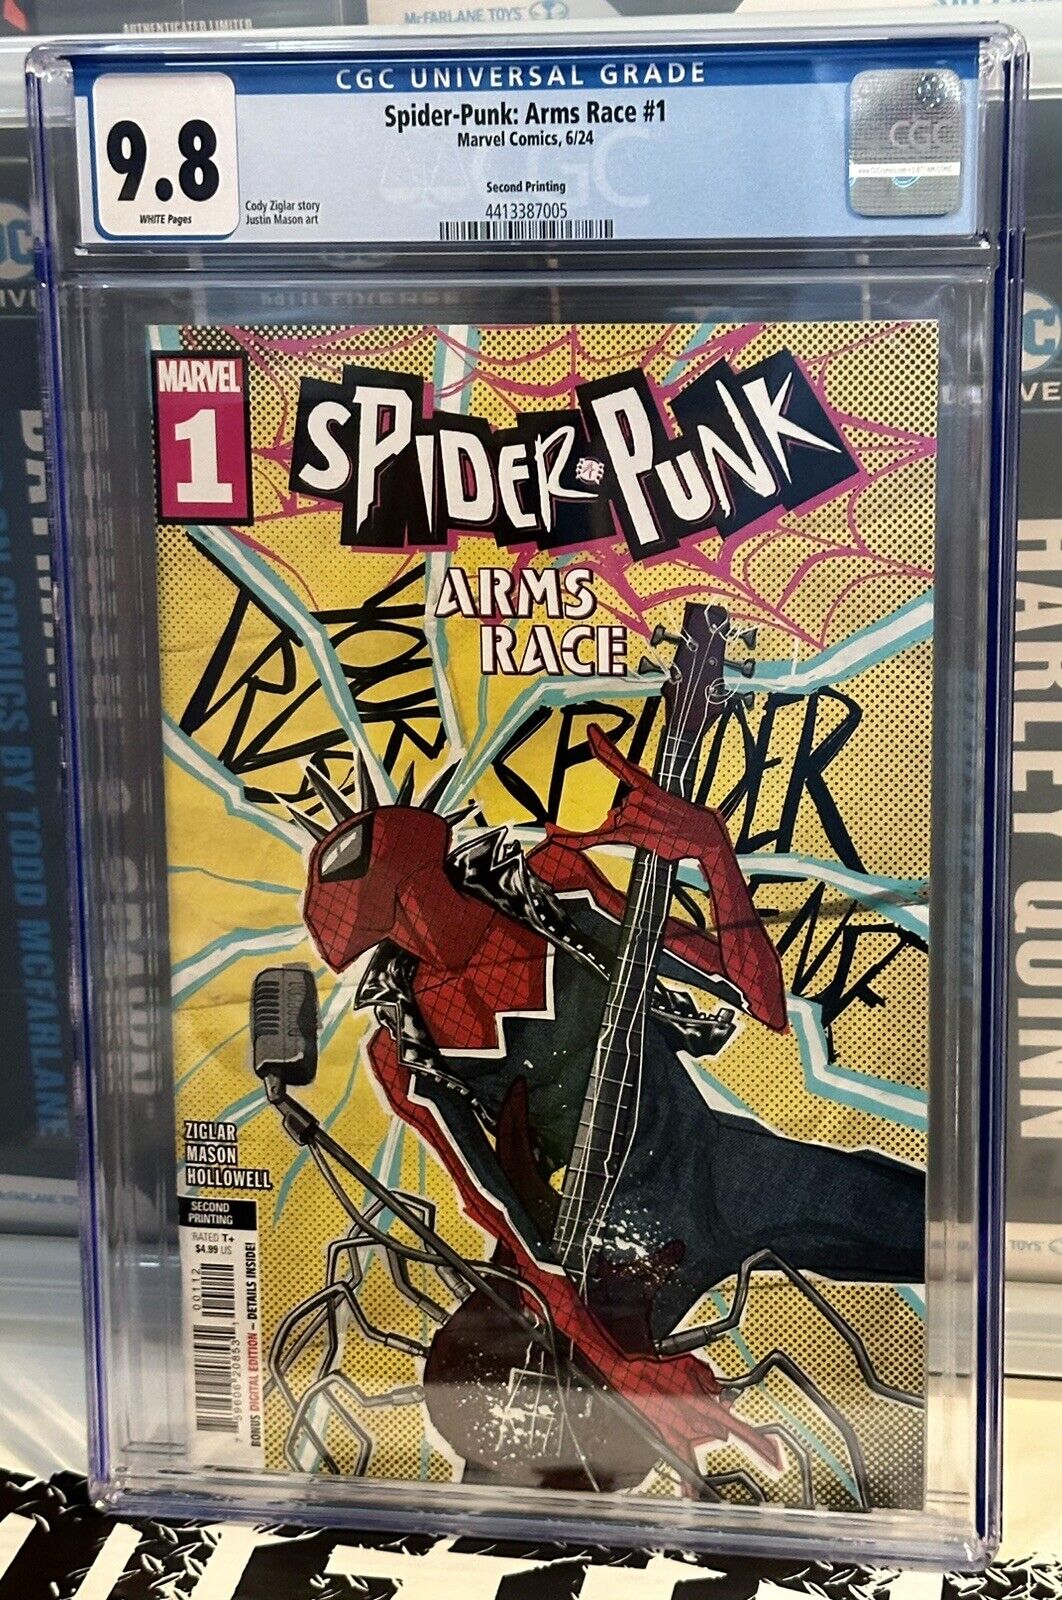 Spider-Punk Arms Race #1 Second Printing Baldeon Variant Cover Marvel Comics New